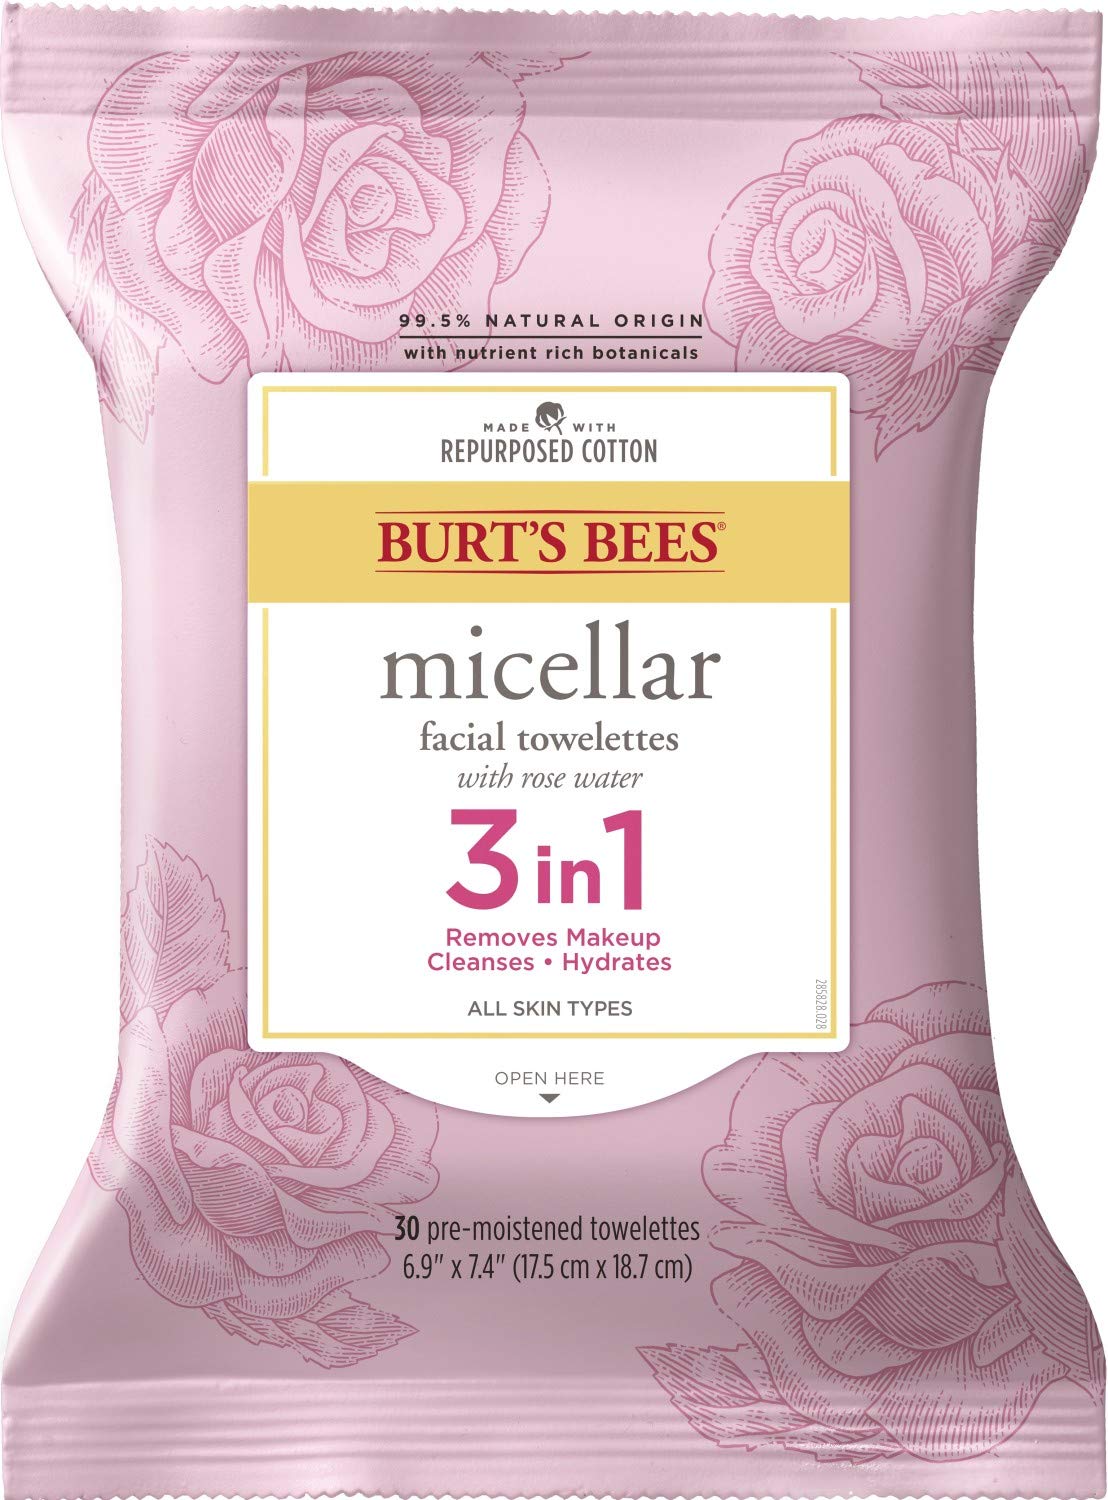 Book Cover Face Wipes, Burt's Bees Facial Cleansing, Makeup Remover Towelettes with Rose Water, 3 in 1 Hydrating Micellar Cleanser, 30 Count 30 Count (Pack of 1) Rose